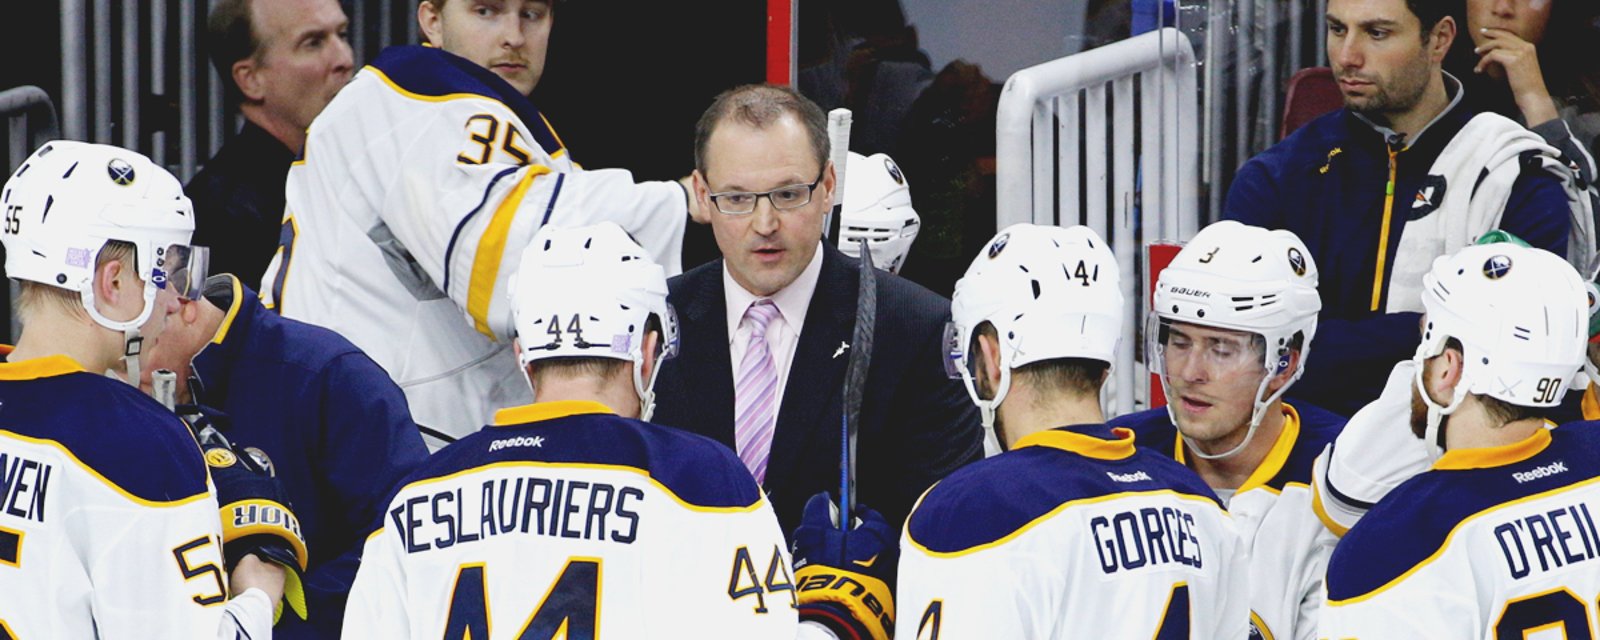 BREAKING: Sabres coach scratches struggling young stars